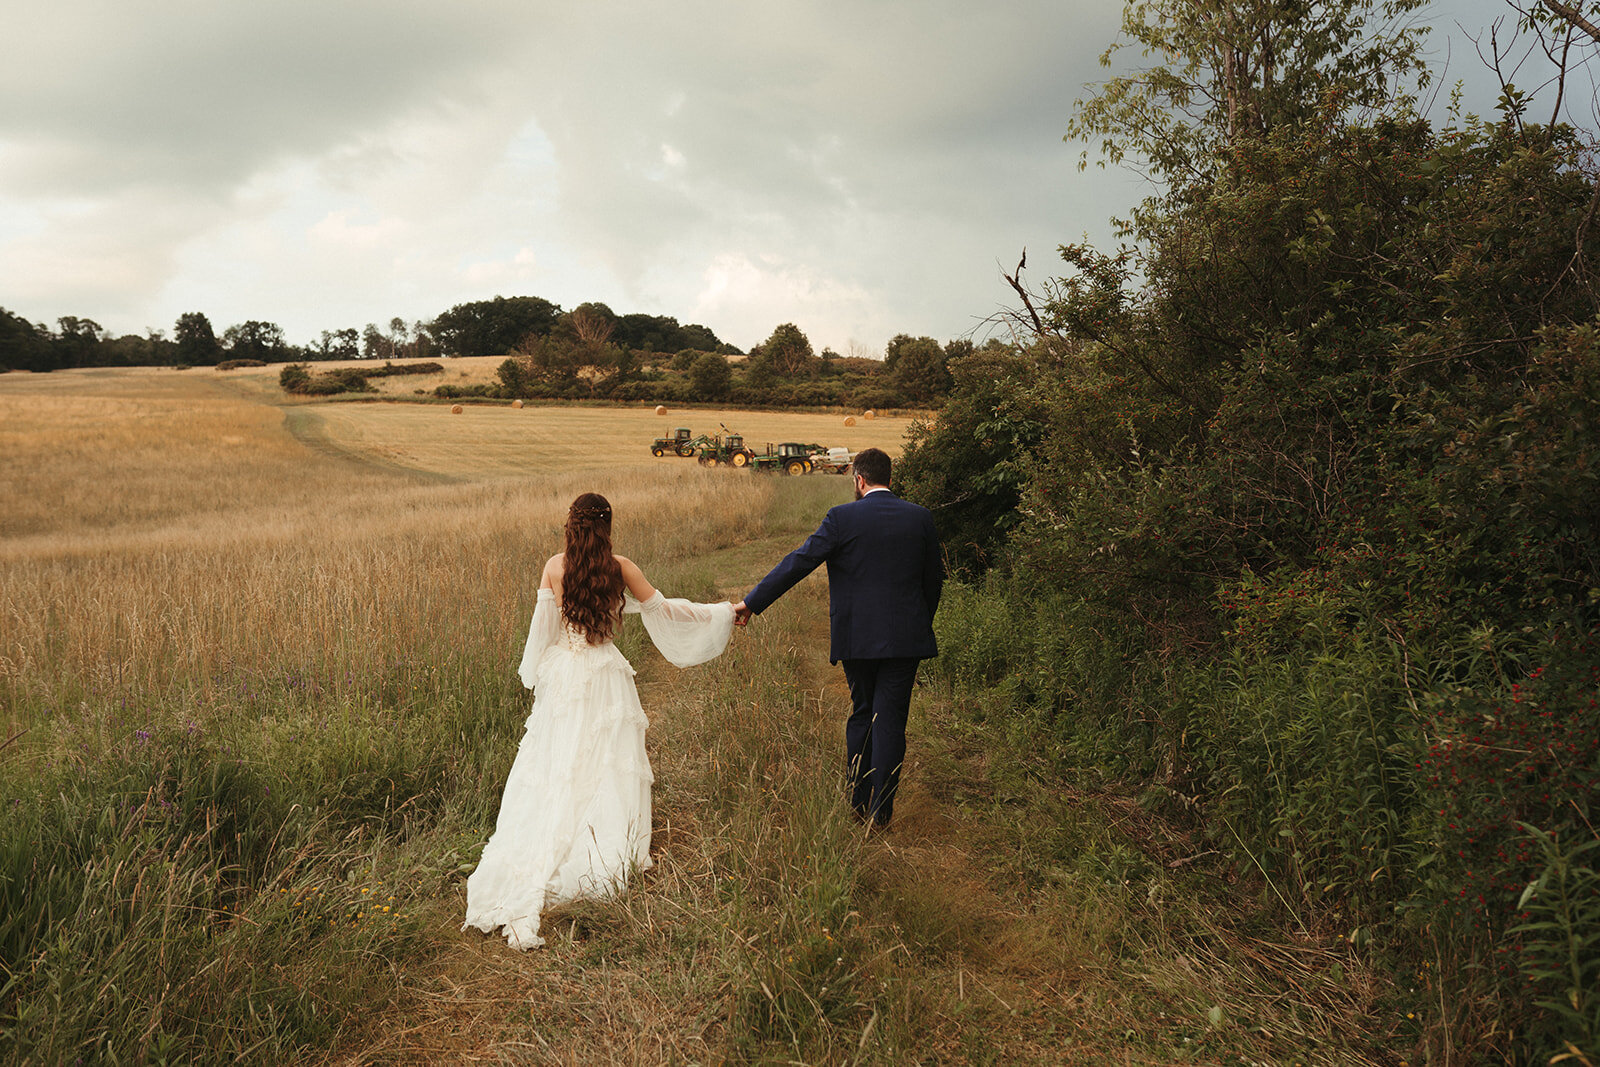 couple walking in field after wedding ceremony holding hands